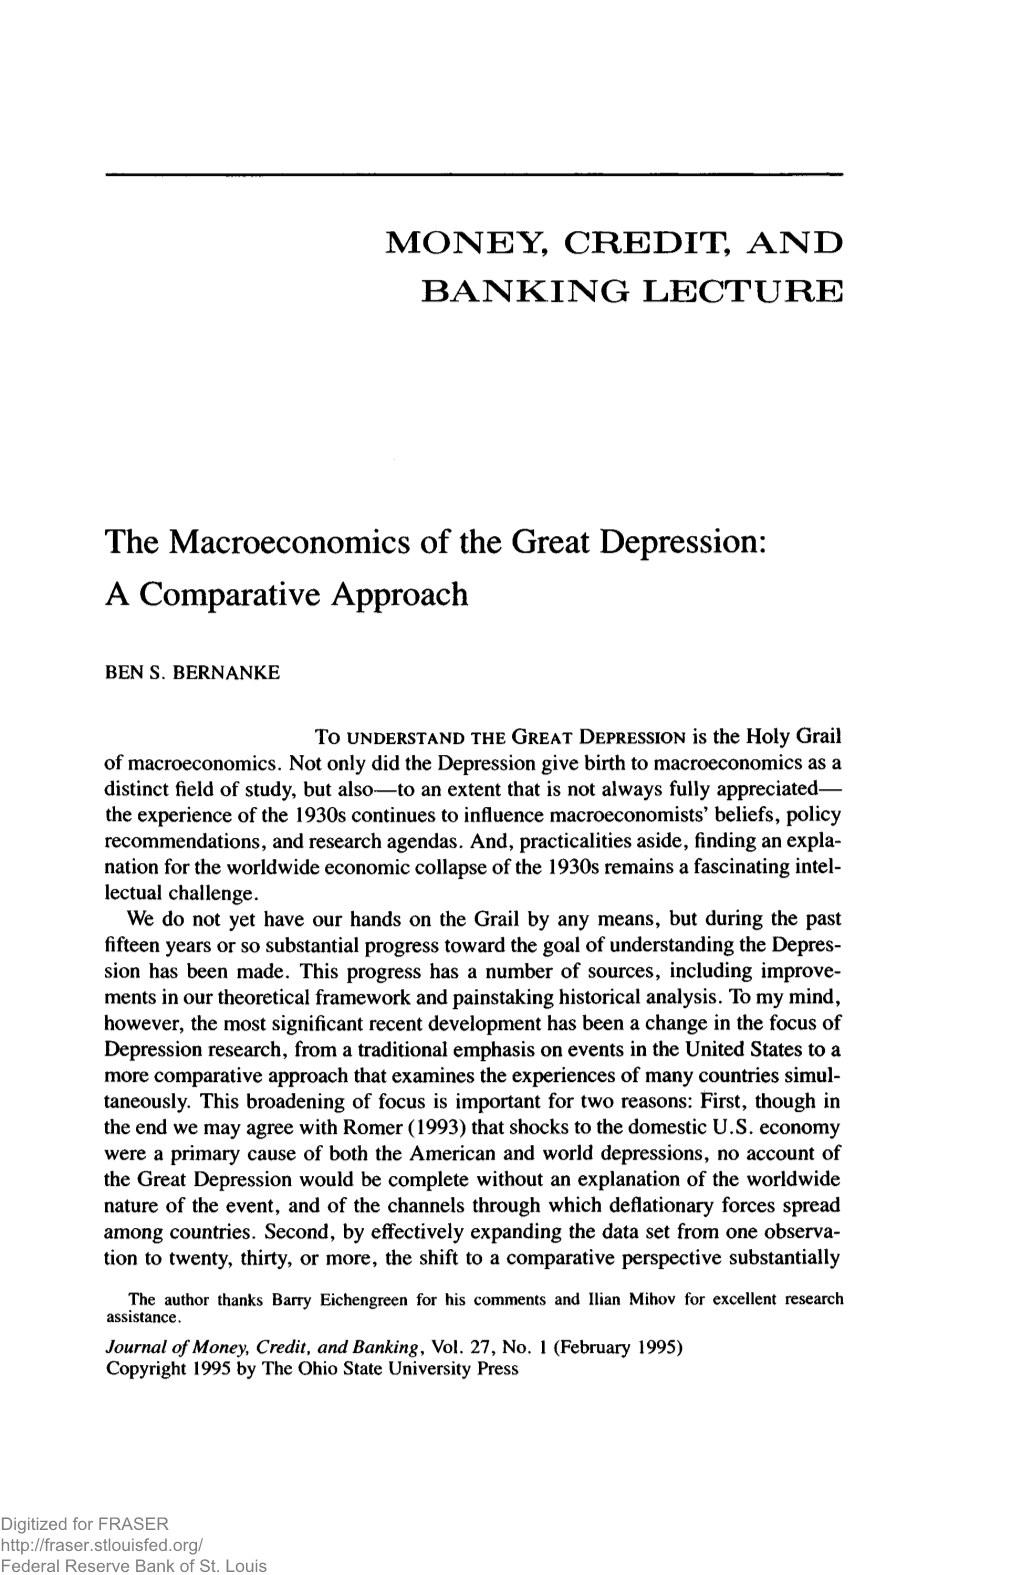 The Macroeconomics of the Great Depression: a Comparative Approach